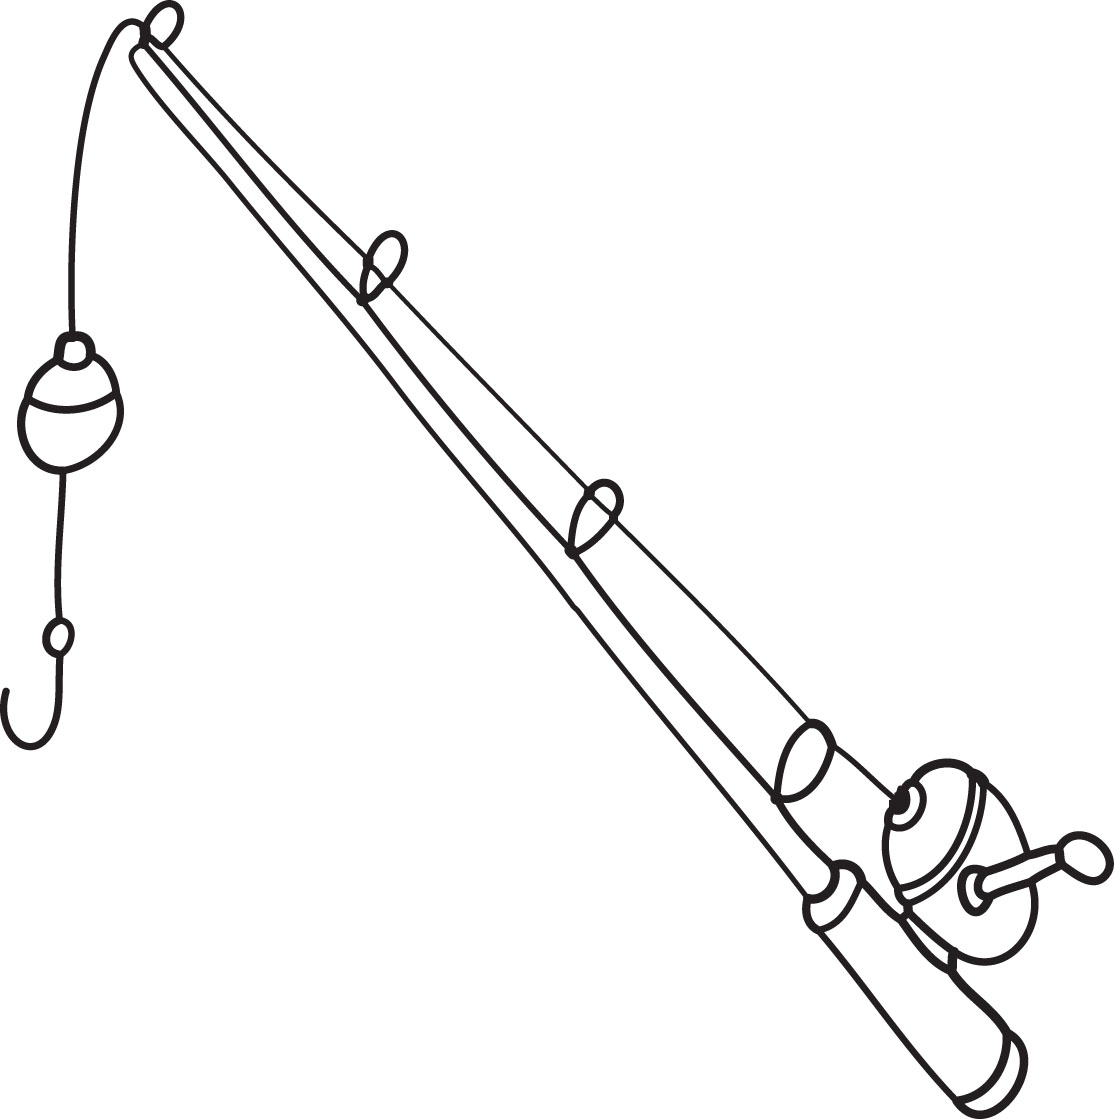 Fishing pole clipart clipart kid 2